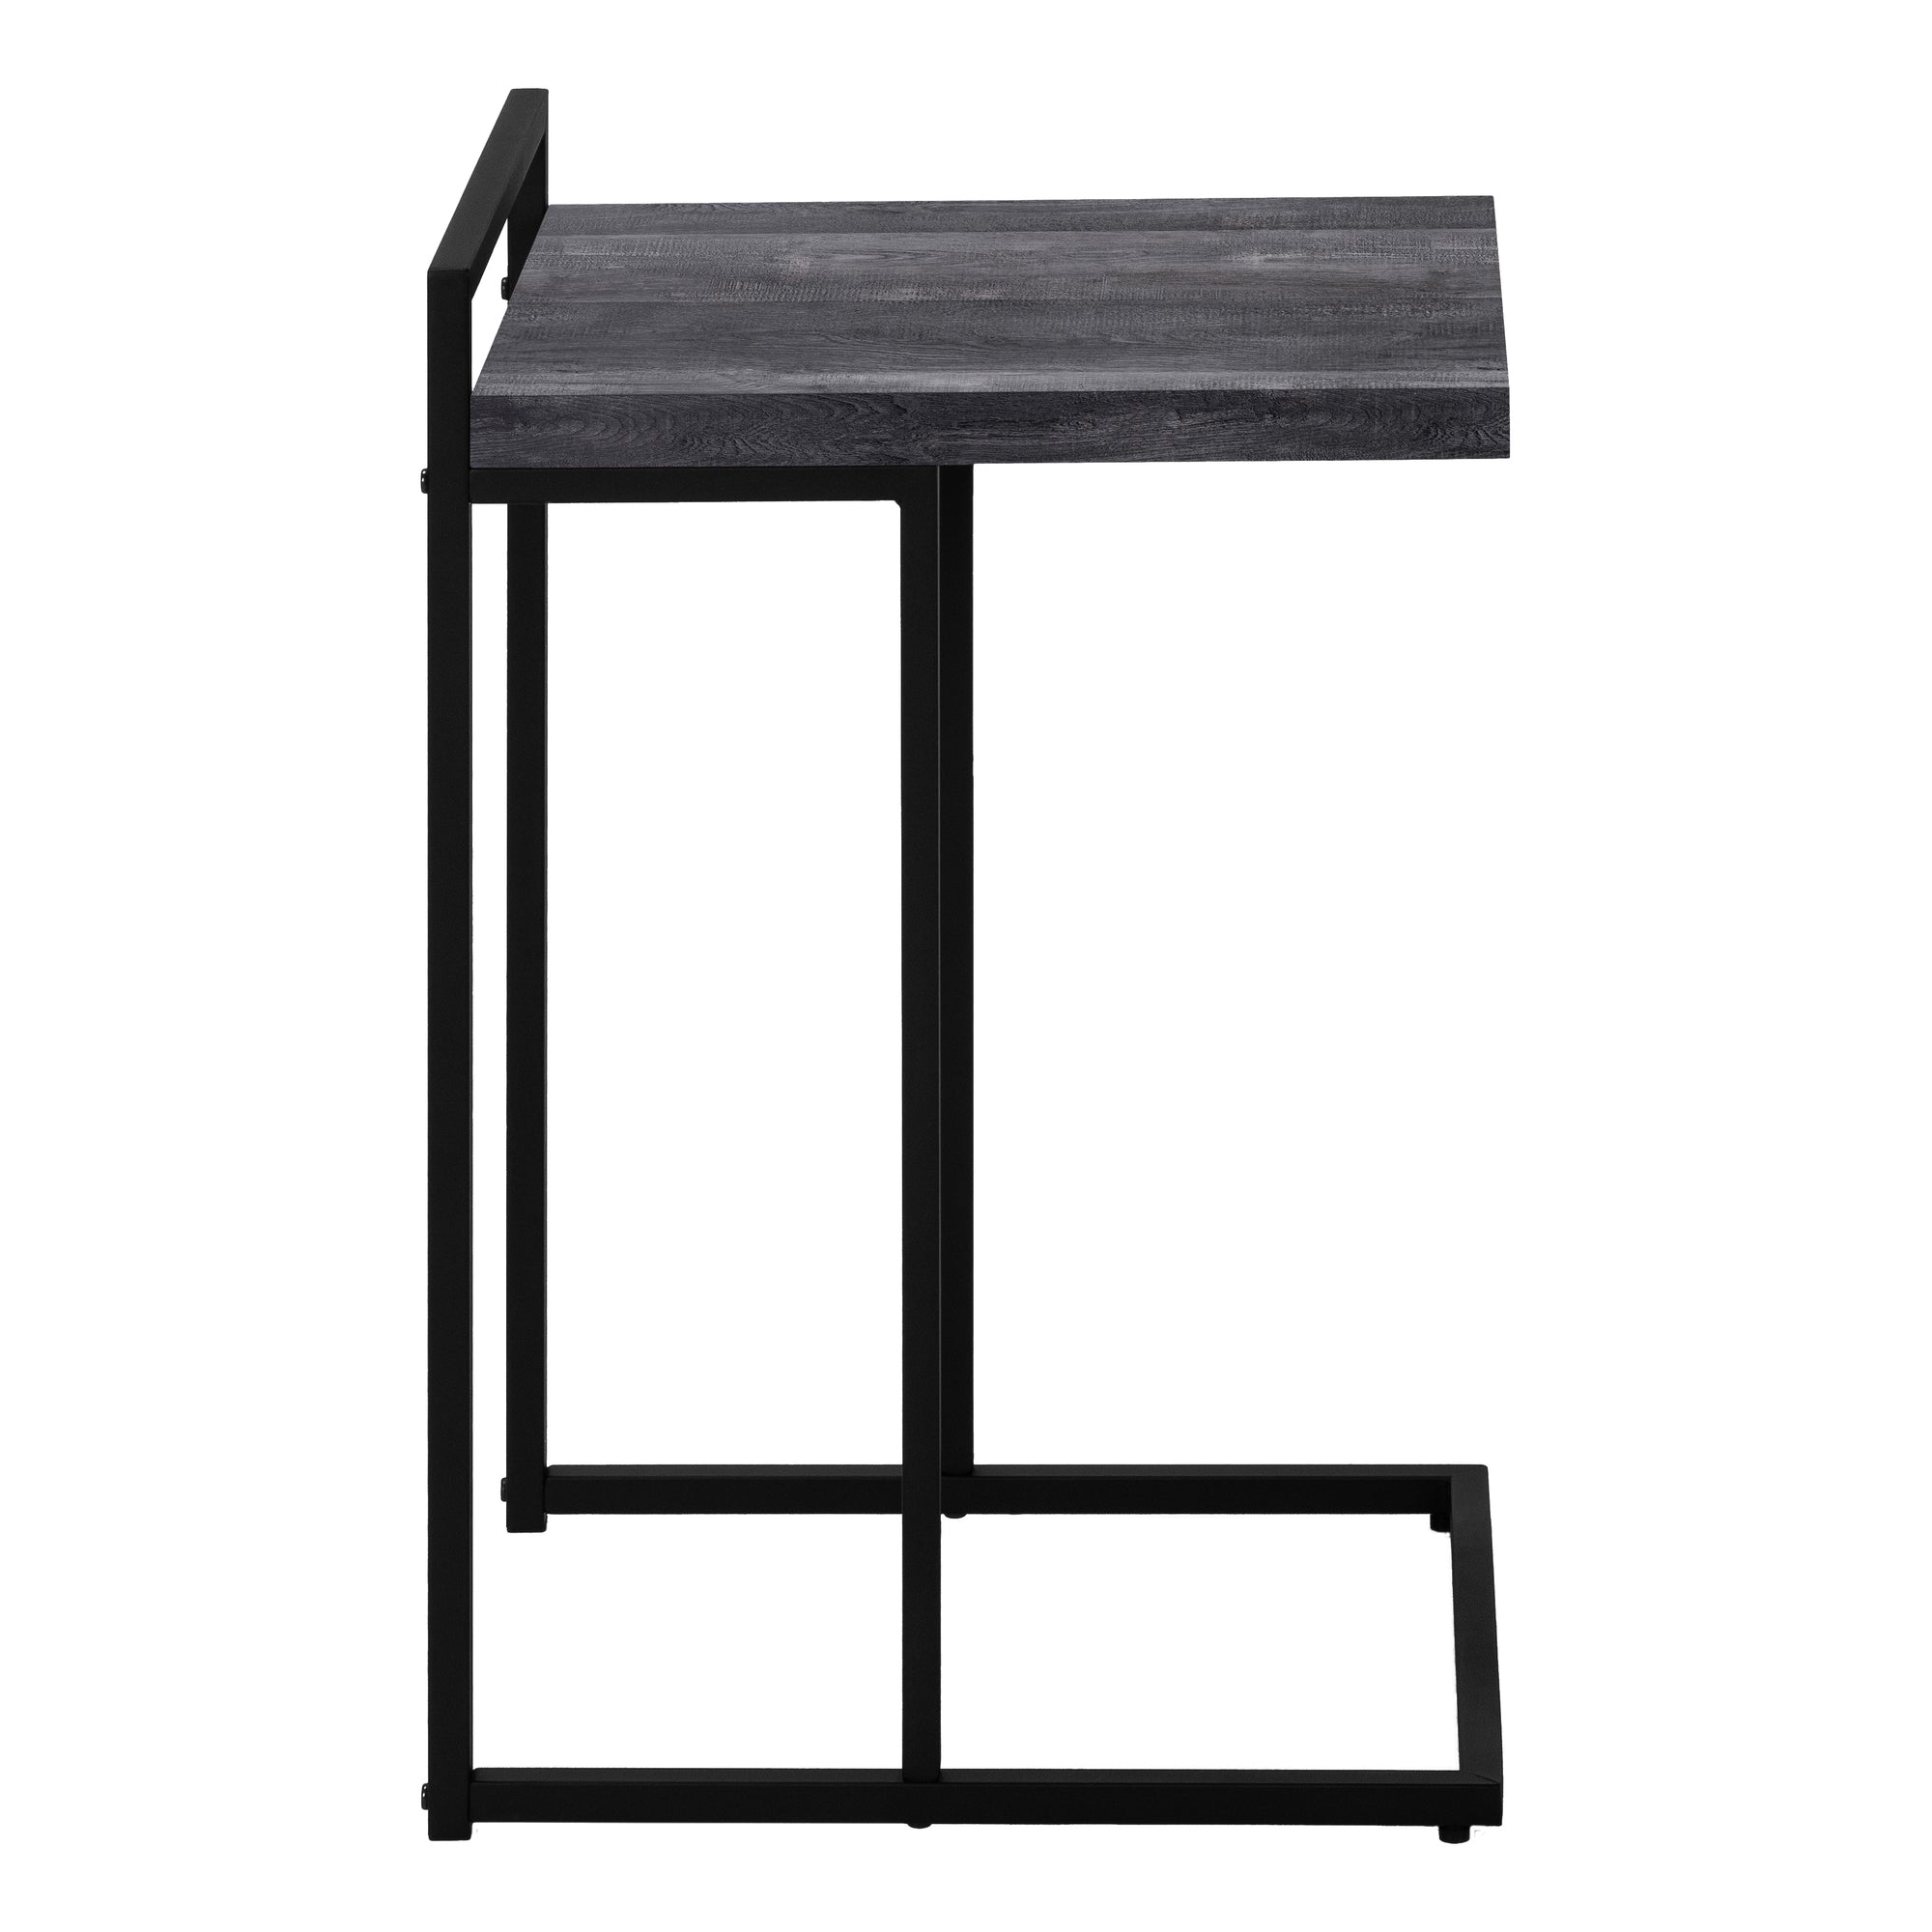 MN-823633    Accent Table, C-Shaped, End, Side, Snack, Living Room, Bedroom, Metal Frame, Laminate, Black Reclaimed Wood-Look, Black, Contemporary, Industrial, Modern